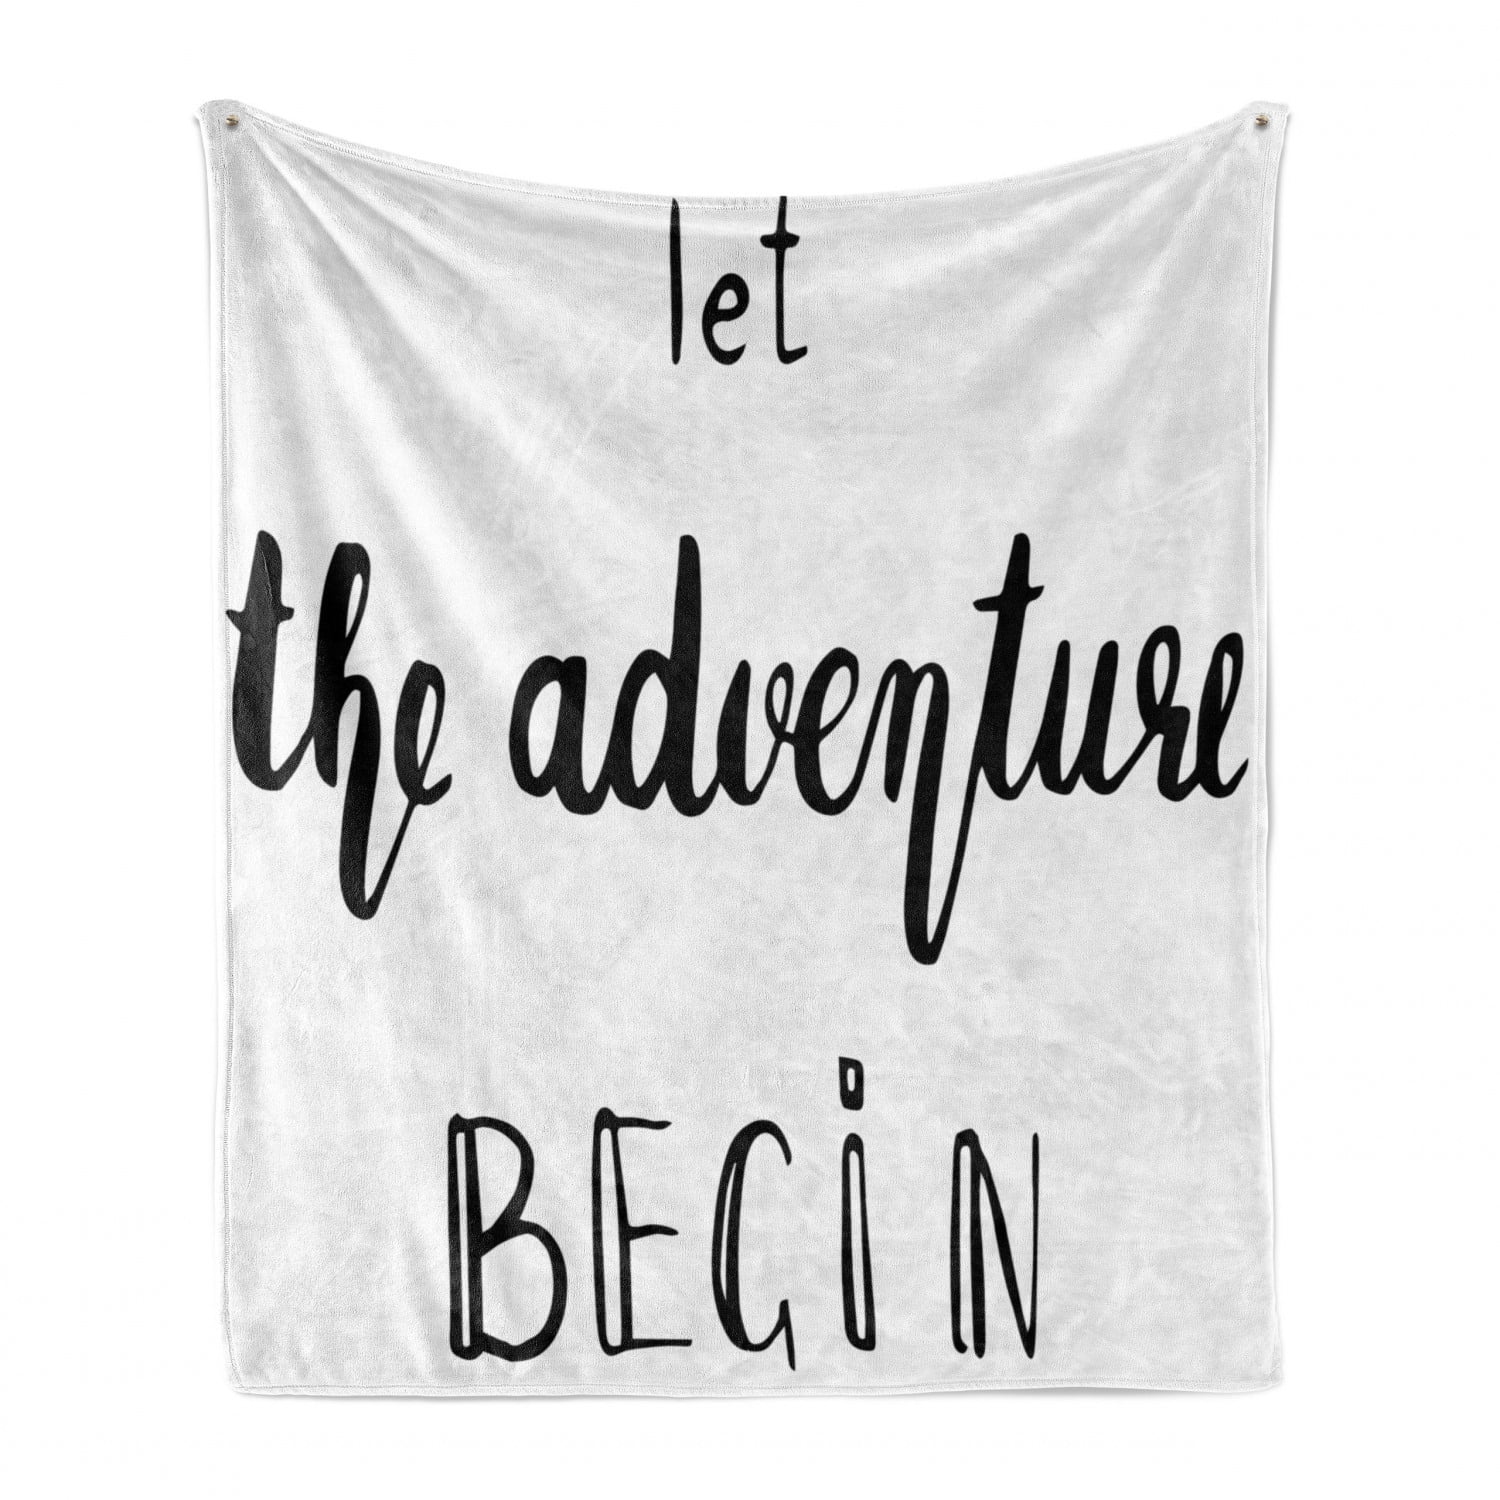 Black White Hand Written Style Different Typography Inspirational Words of Wisdom Doodle Art 50 x 60 Cozy Plush for Indoor and Outdoor Use Ambesonne Adventure Soft Flannel Fleece Throw Blanket 